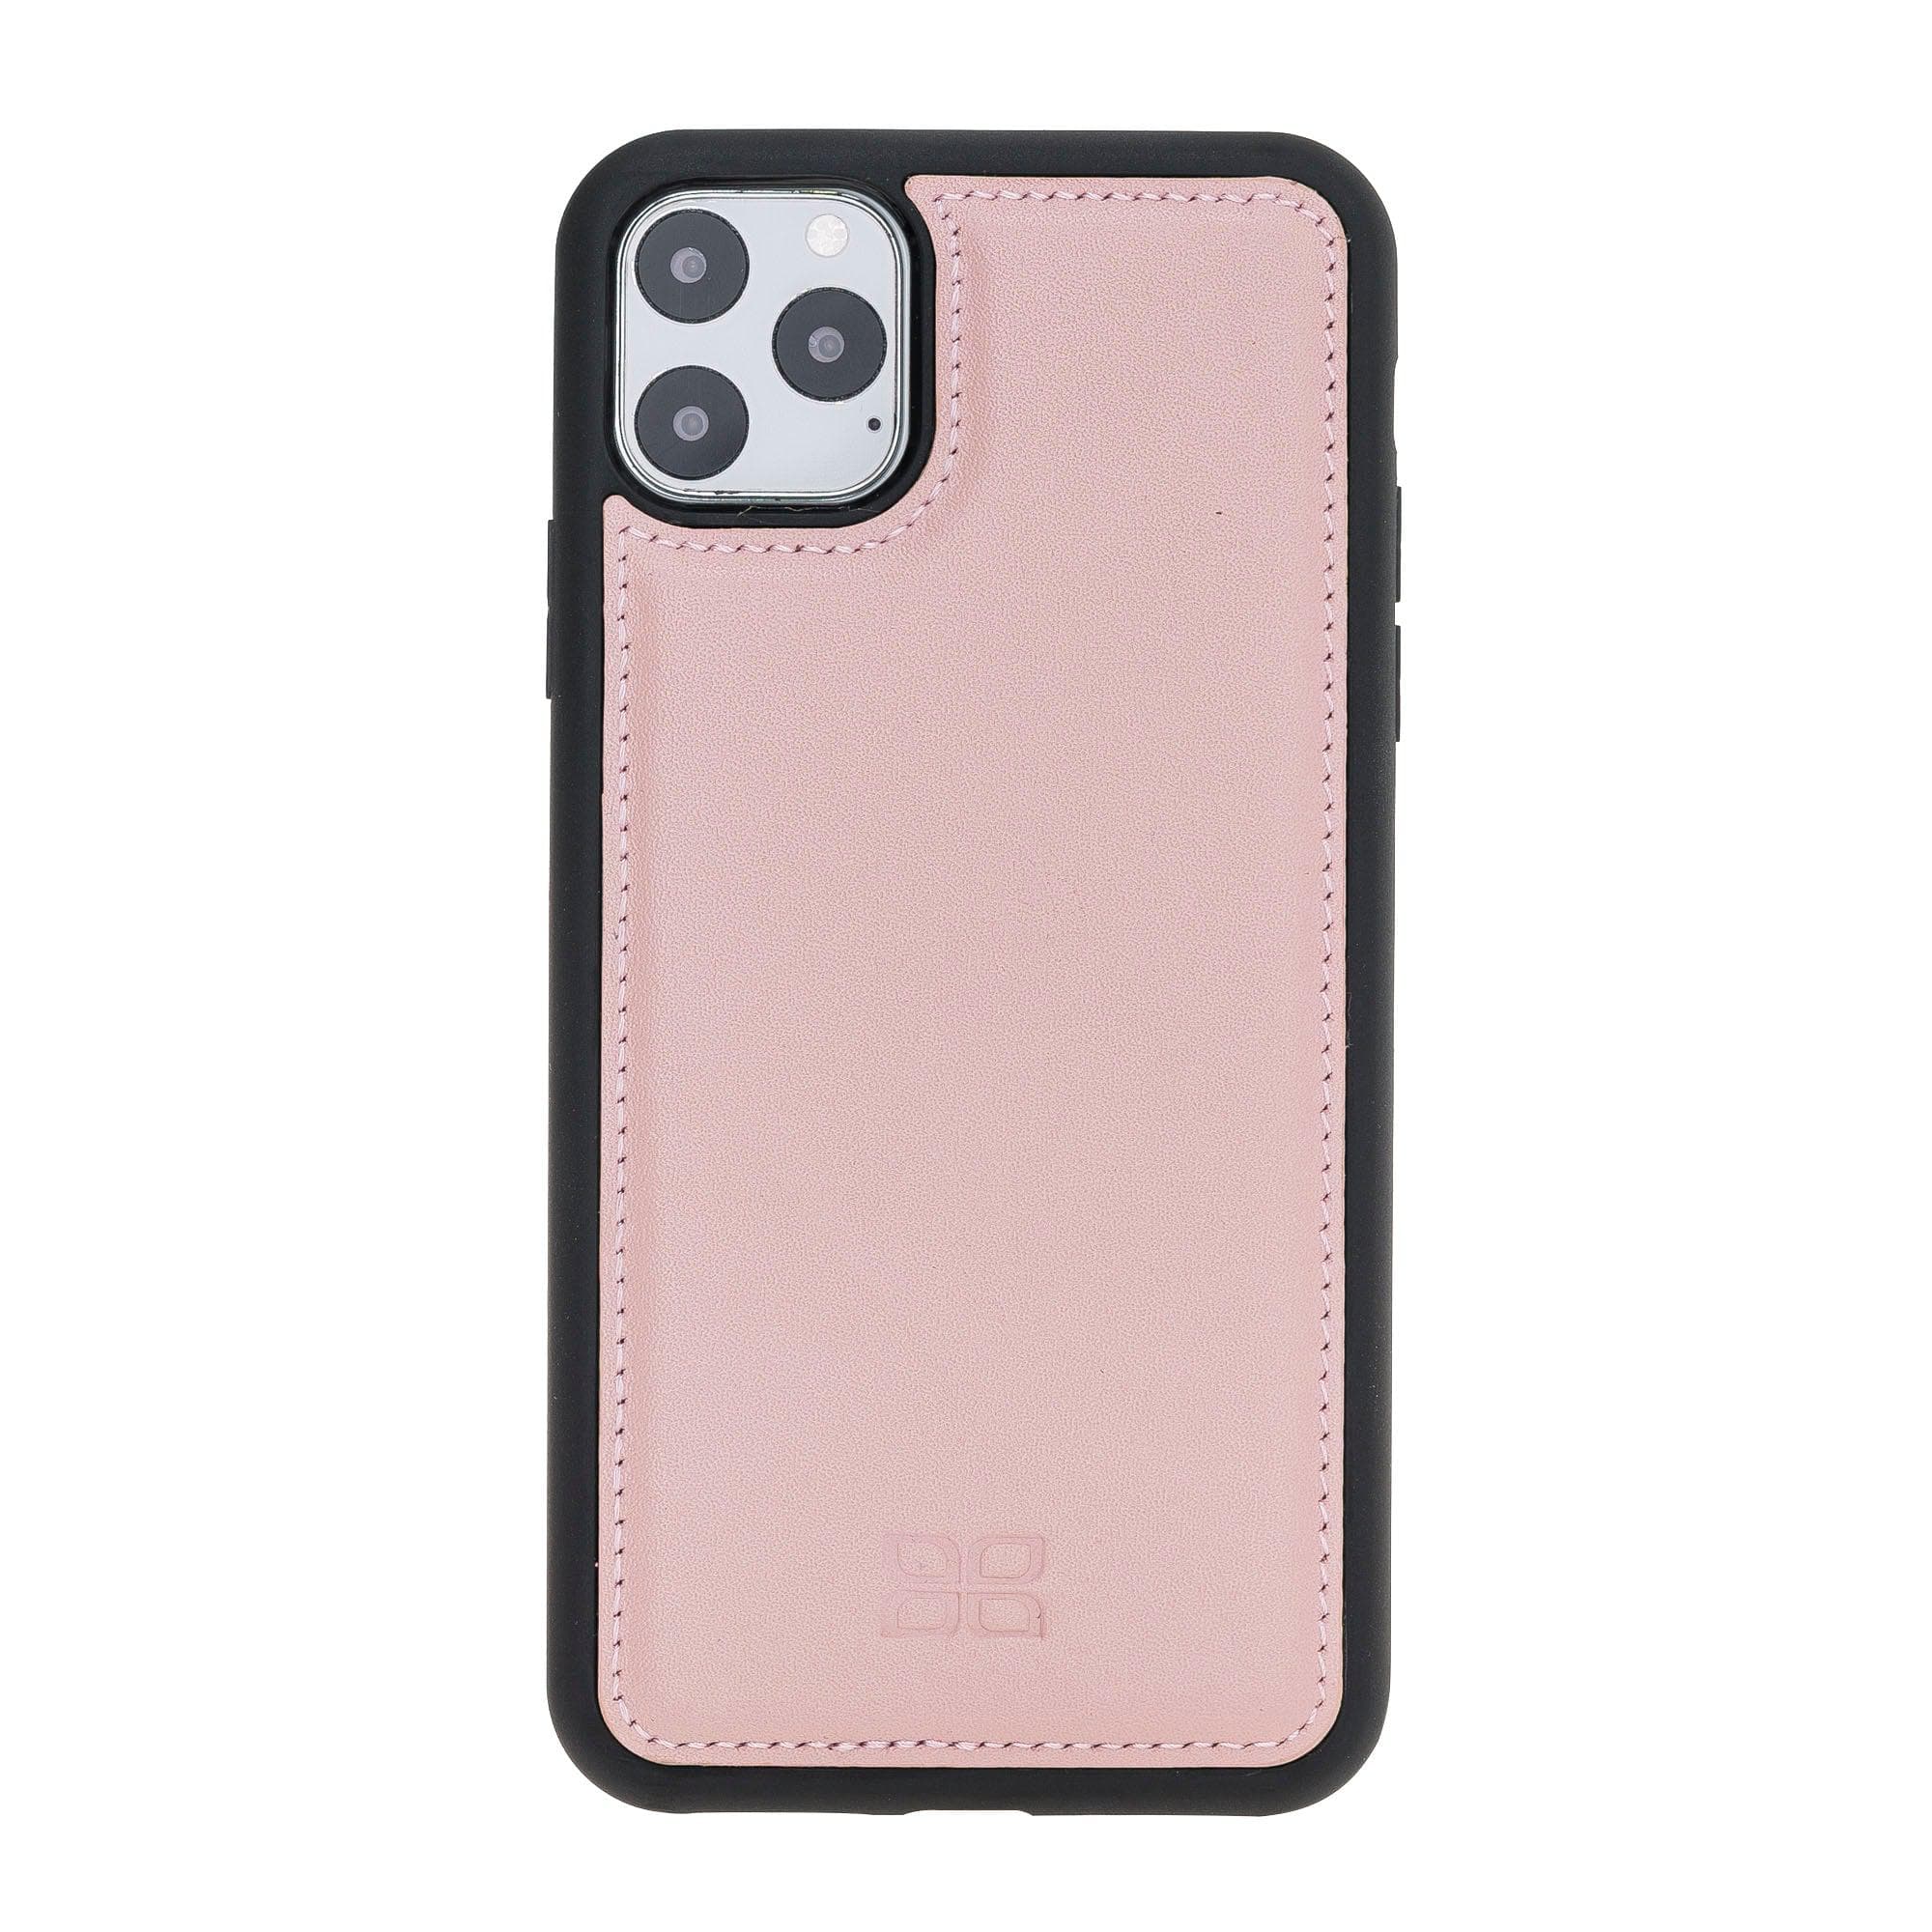 Flex Cover Leather Back Cover Case for Apple iPhone 11 Series iPhone 11 Promax 6.5" / Pink Bouletta LTD